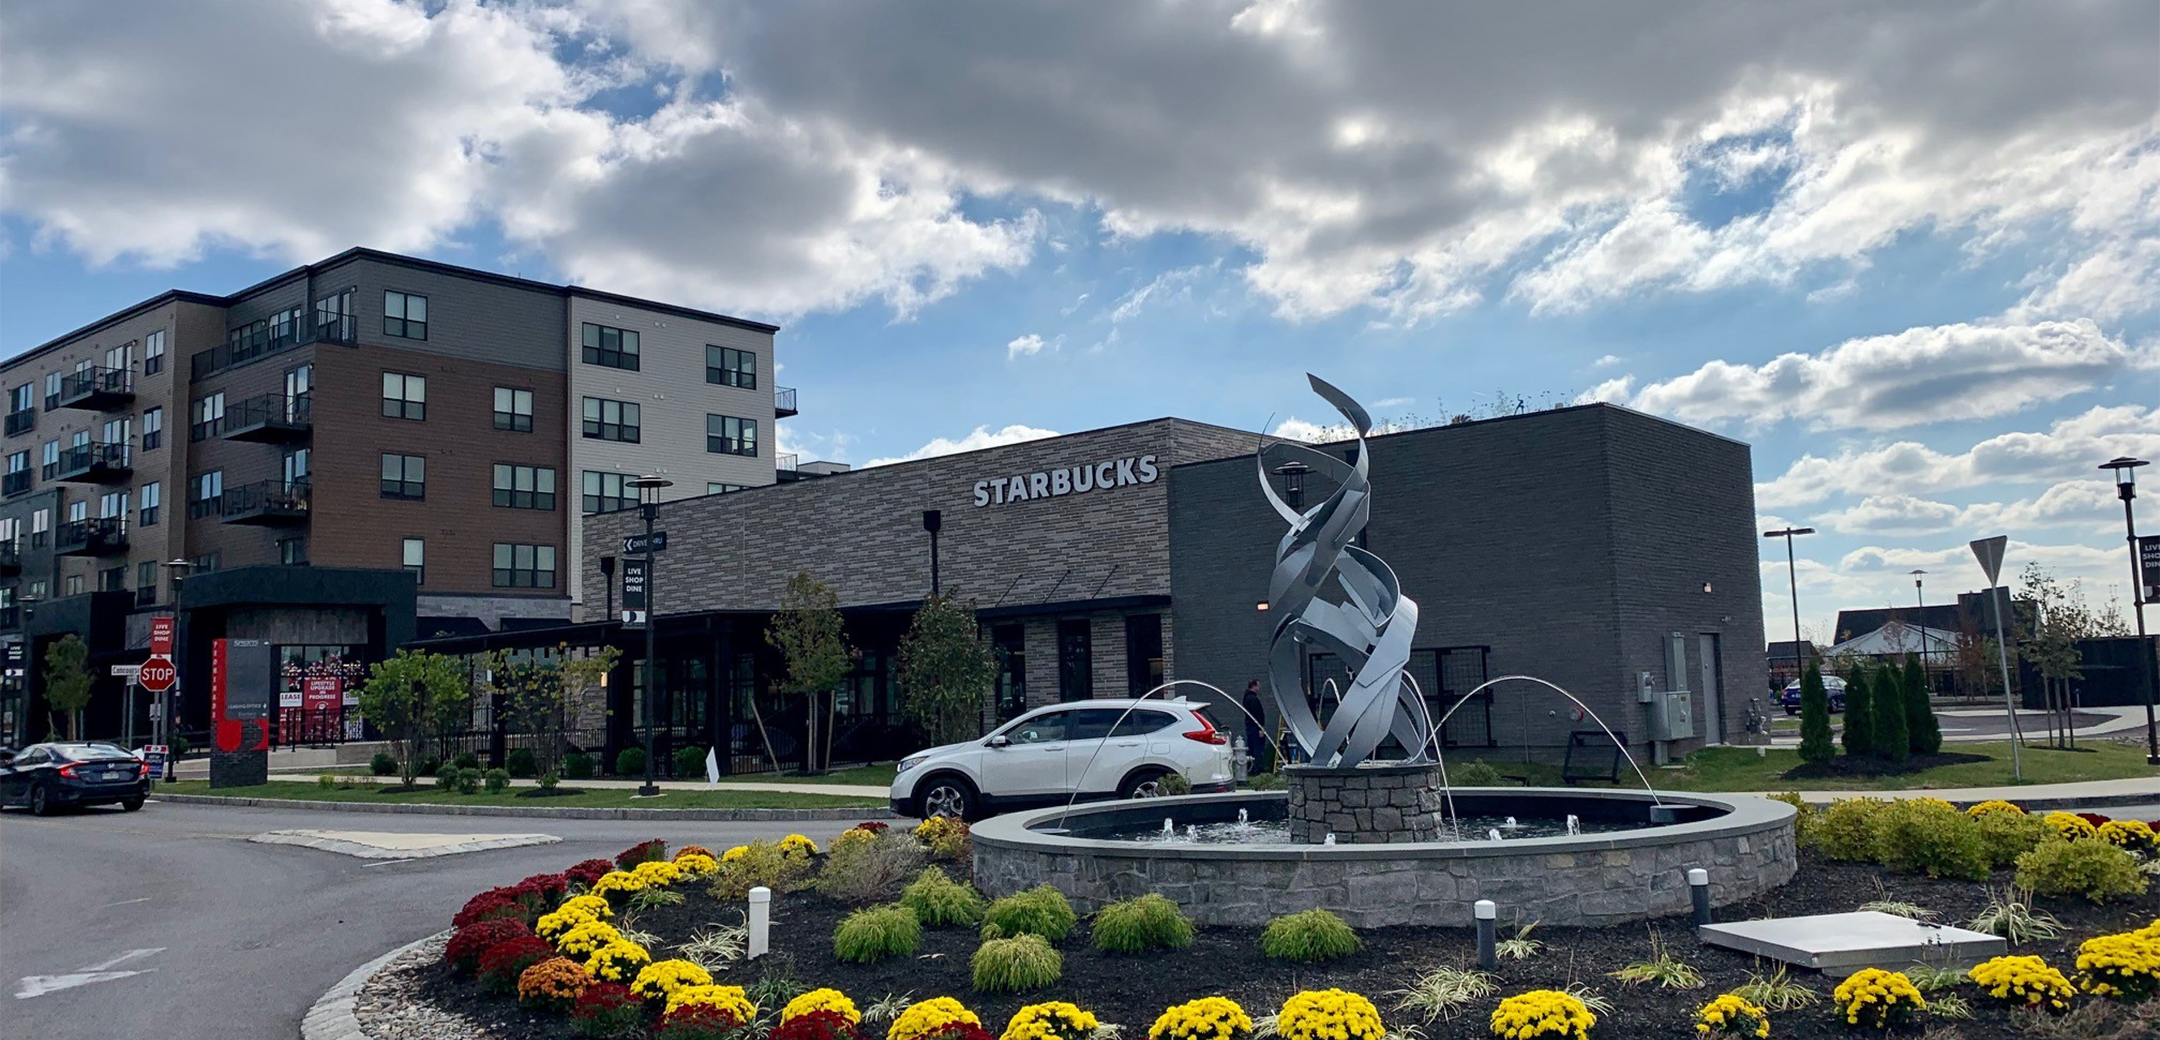 A view of the Starbucks mixed gray brick building showcasing the main street foreground fountain with a metal sculpture in the center and landscaped flowers encircling it.